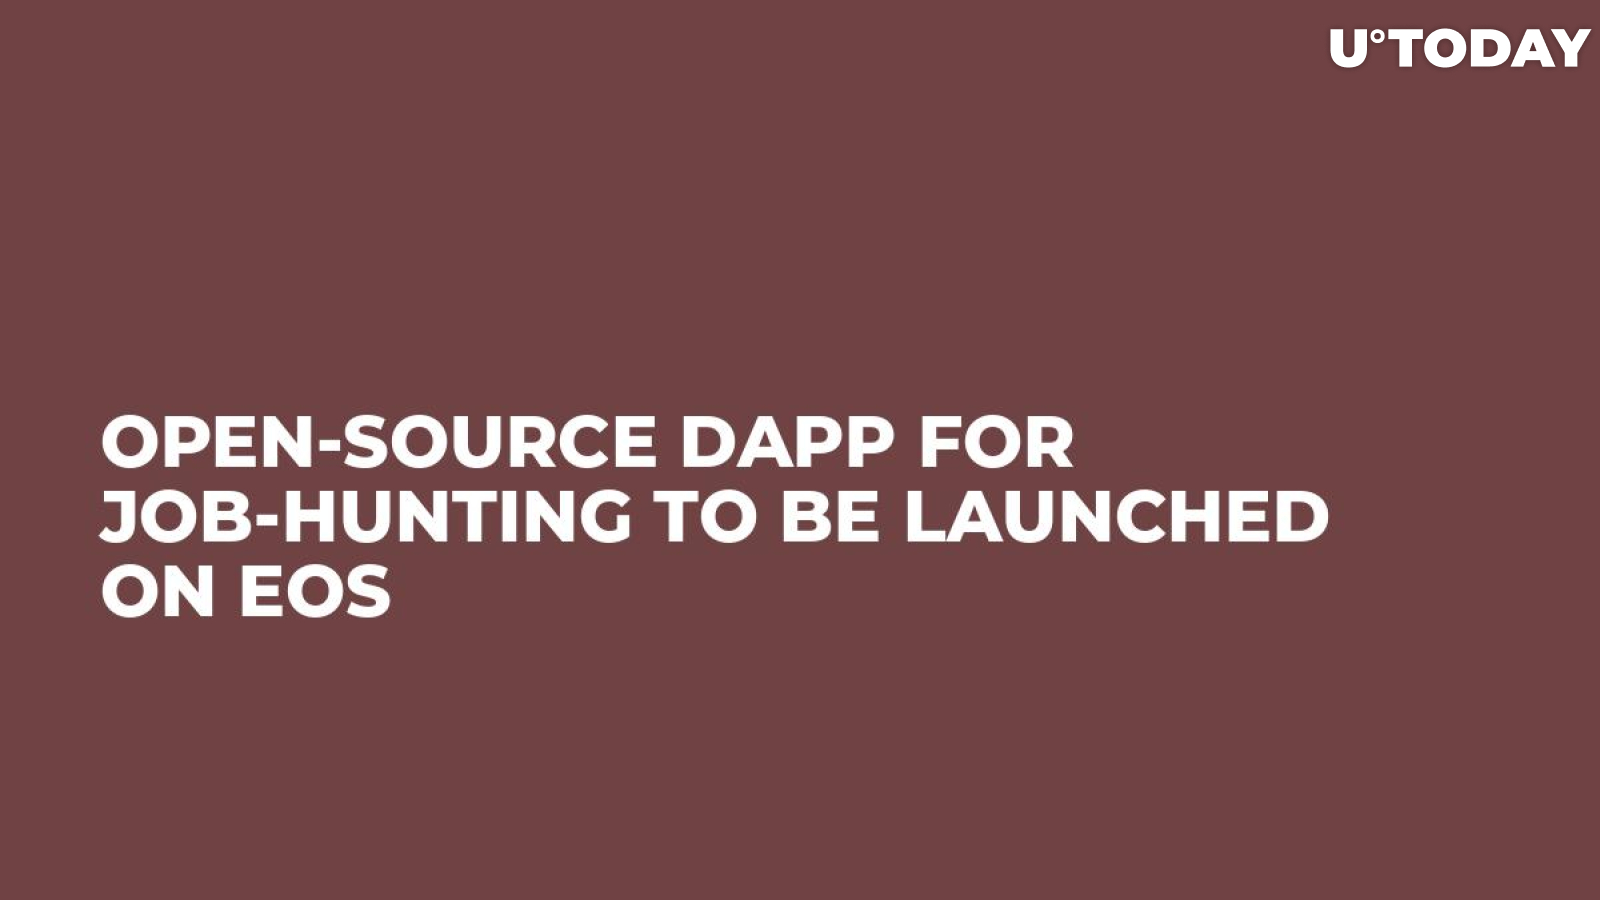 Open-Source DApp for Job-Hunting to Be Launched on EOS